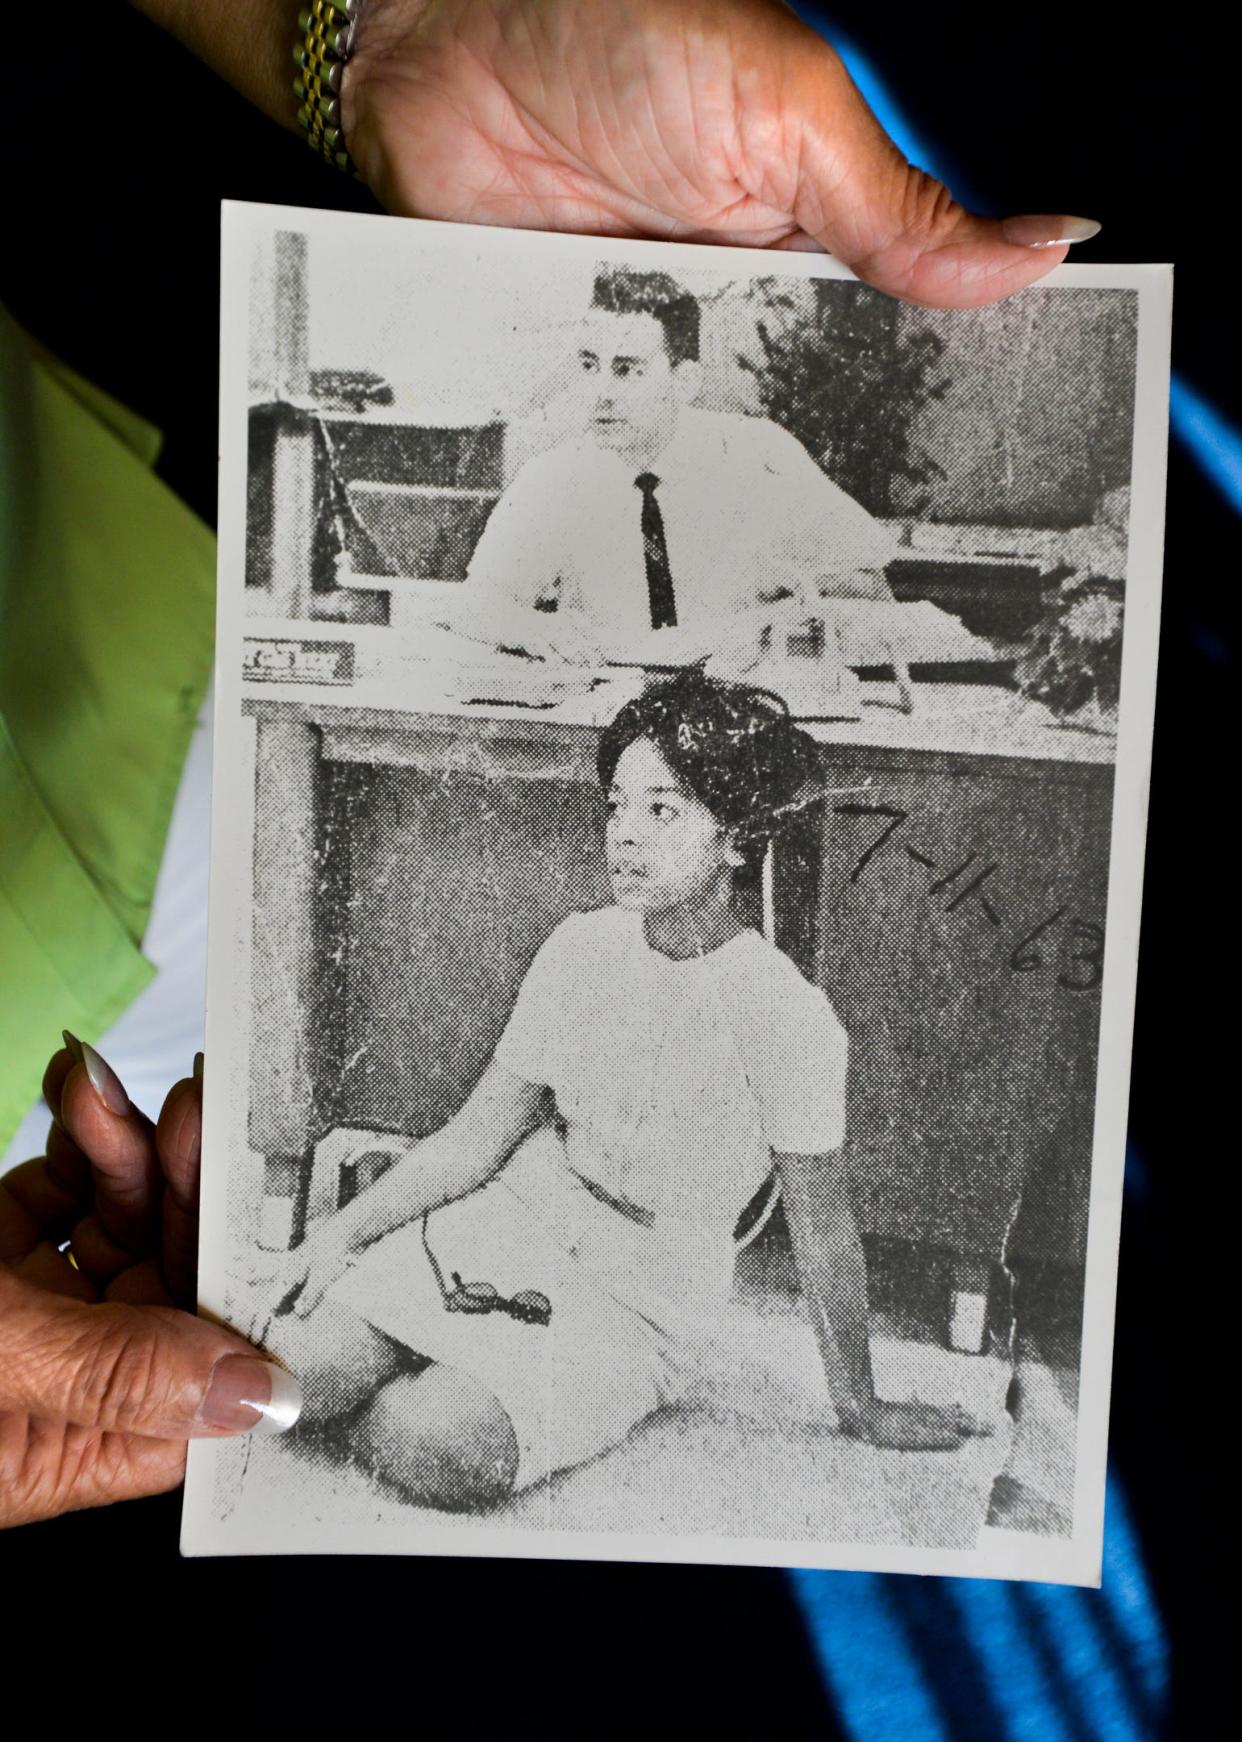 Geraldine Williams was just 17-years-old when she was participated in a sit-in at CILCO's downtown Peoria offices. That photo on the front page of the Journal Star made a big impression on 21-year-old Roscoe McCall.